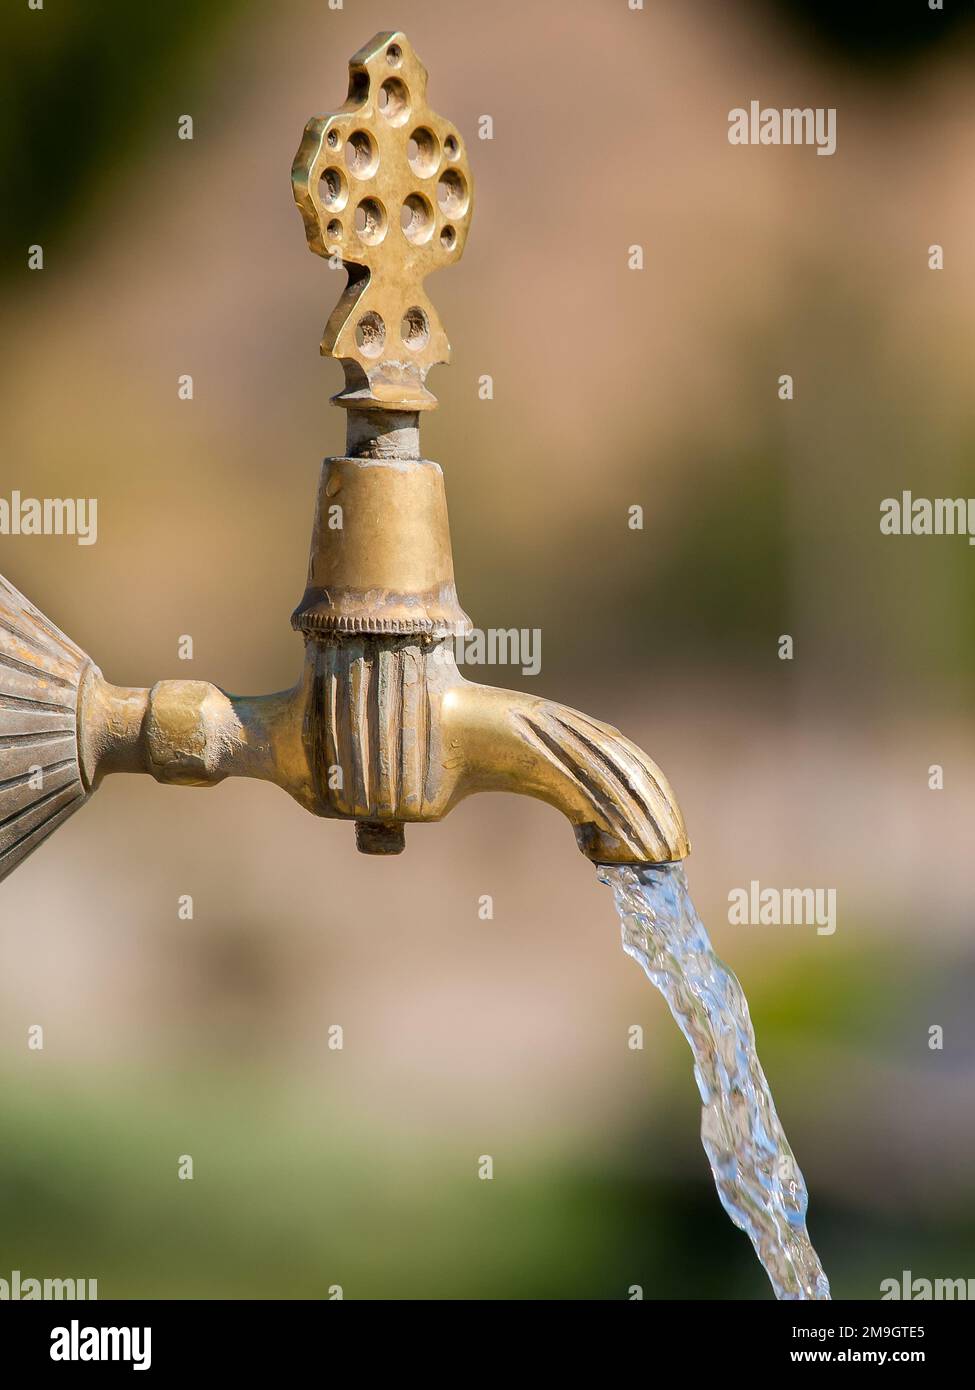 Old water tap Stock Photo